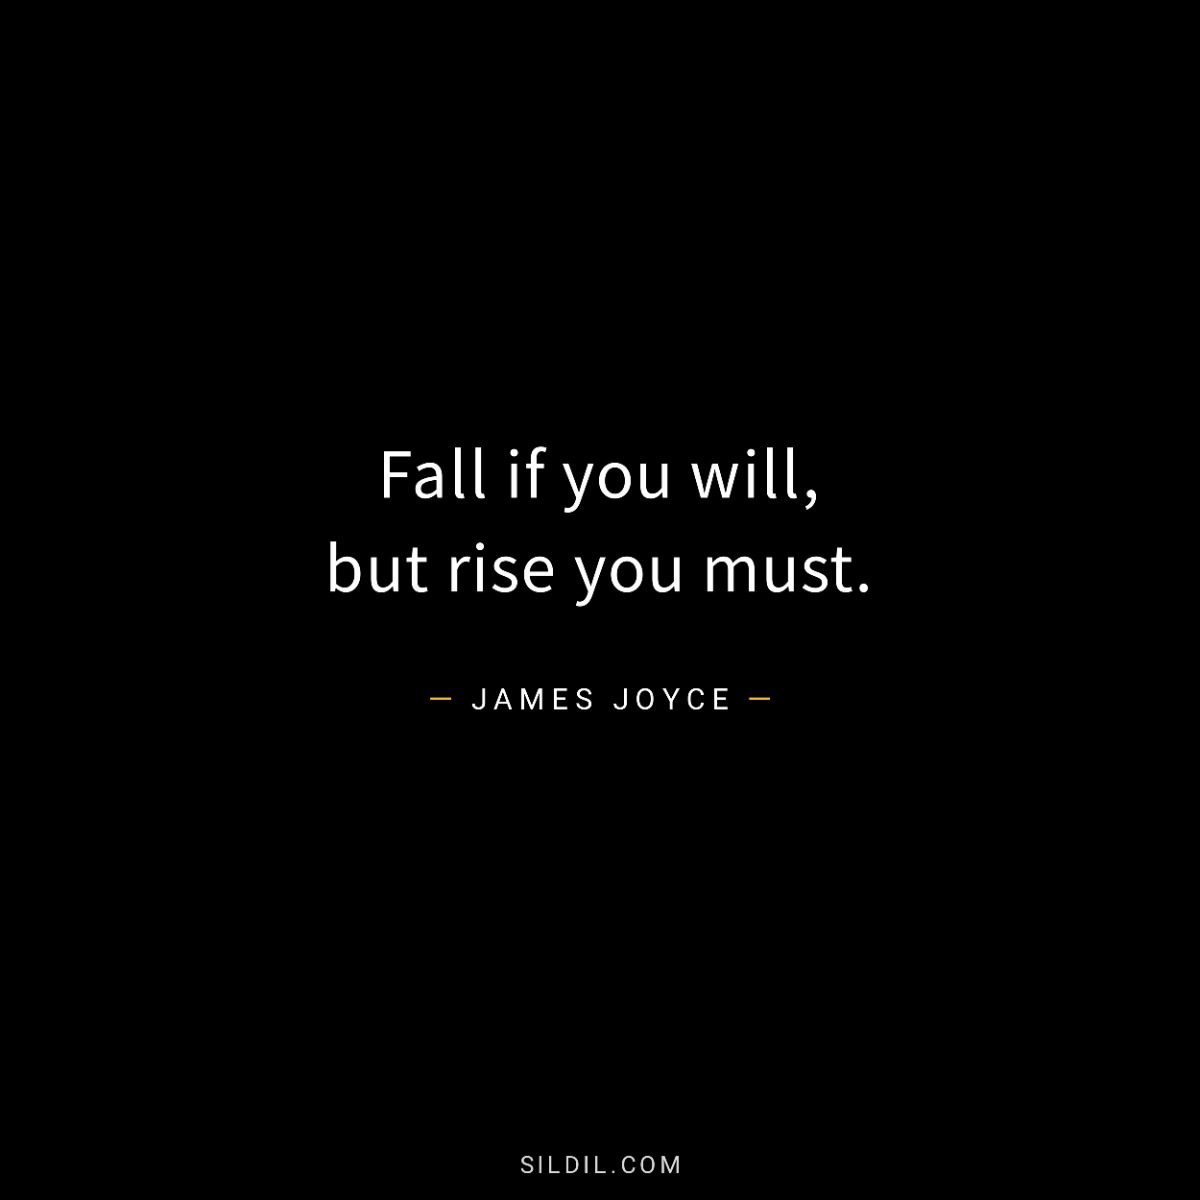 Fall if you will, but rise you must.